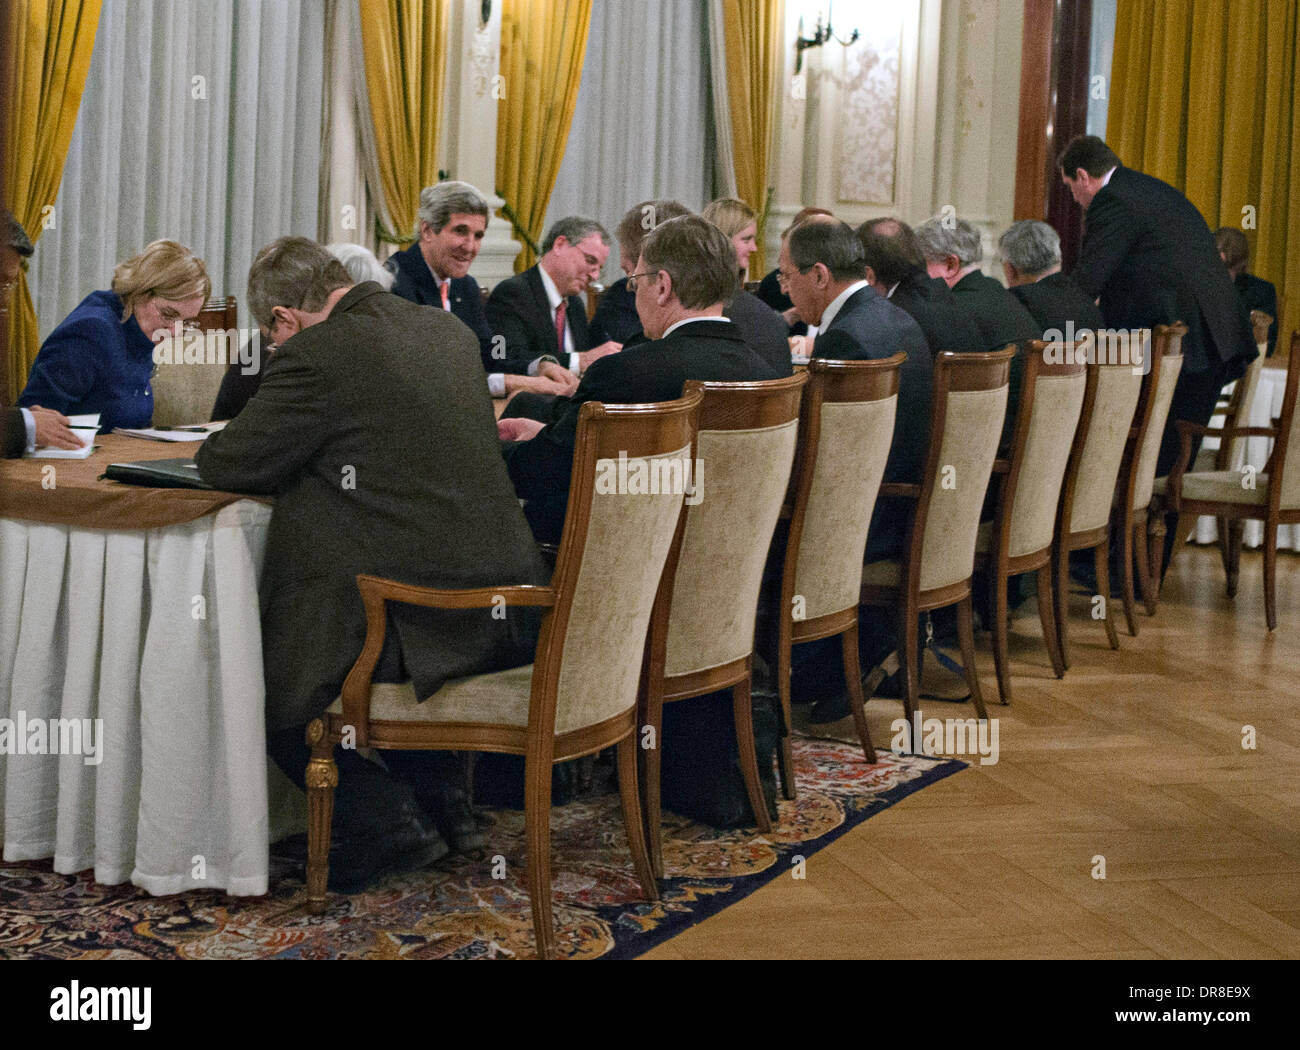 US Secretary of State John Kerry holds talks with Russian Foreign Minister Sergey Lavrov before the start of the Geneva II Conference on Syria January 21, 2014 in Montreux, Switzerland. Stock Photo